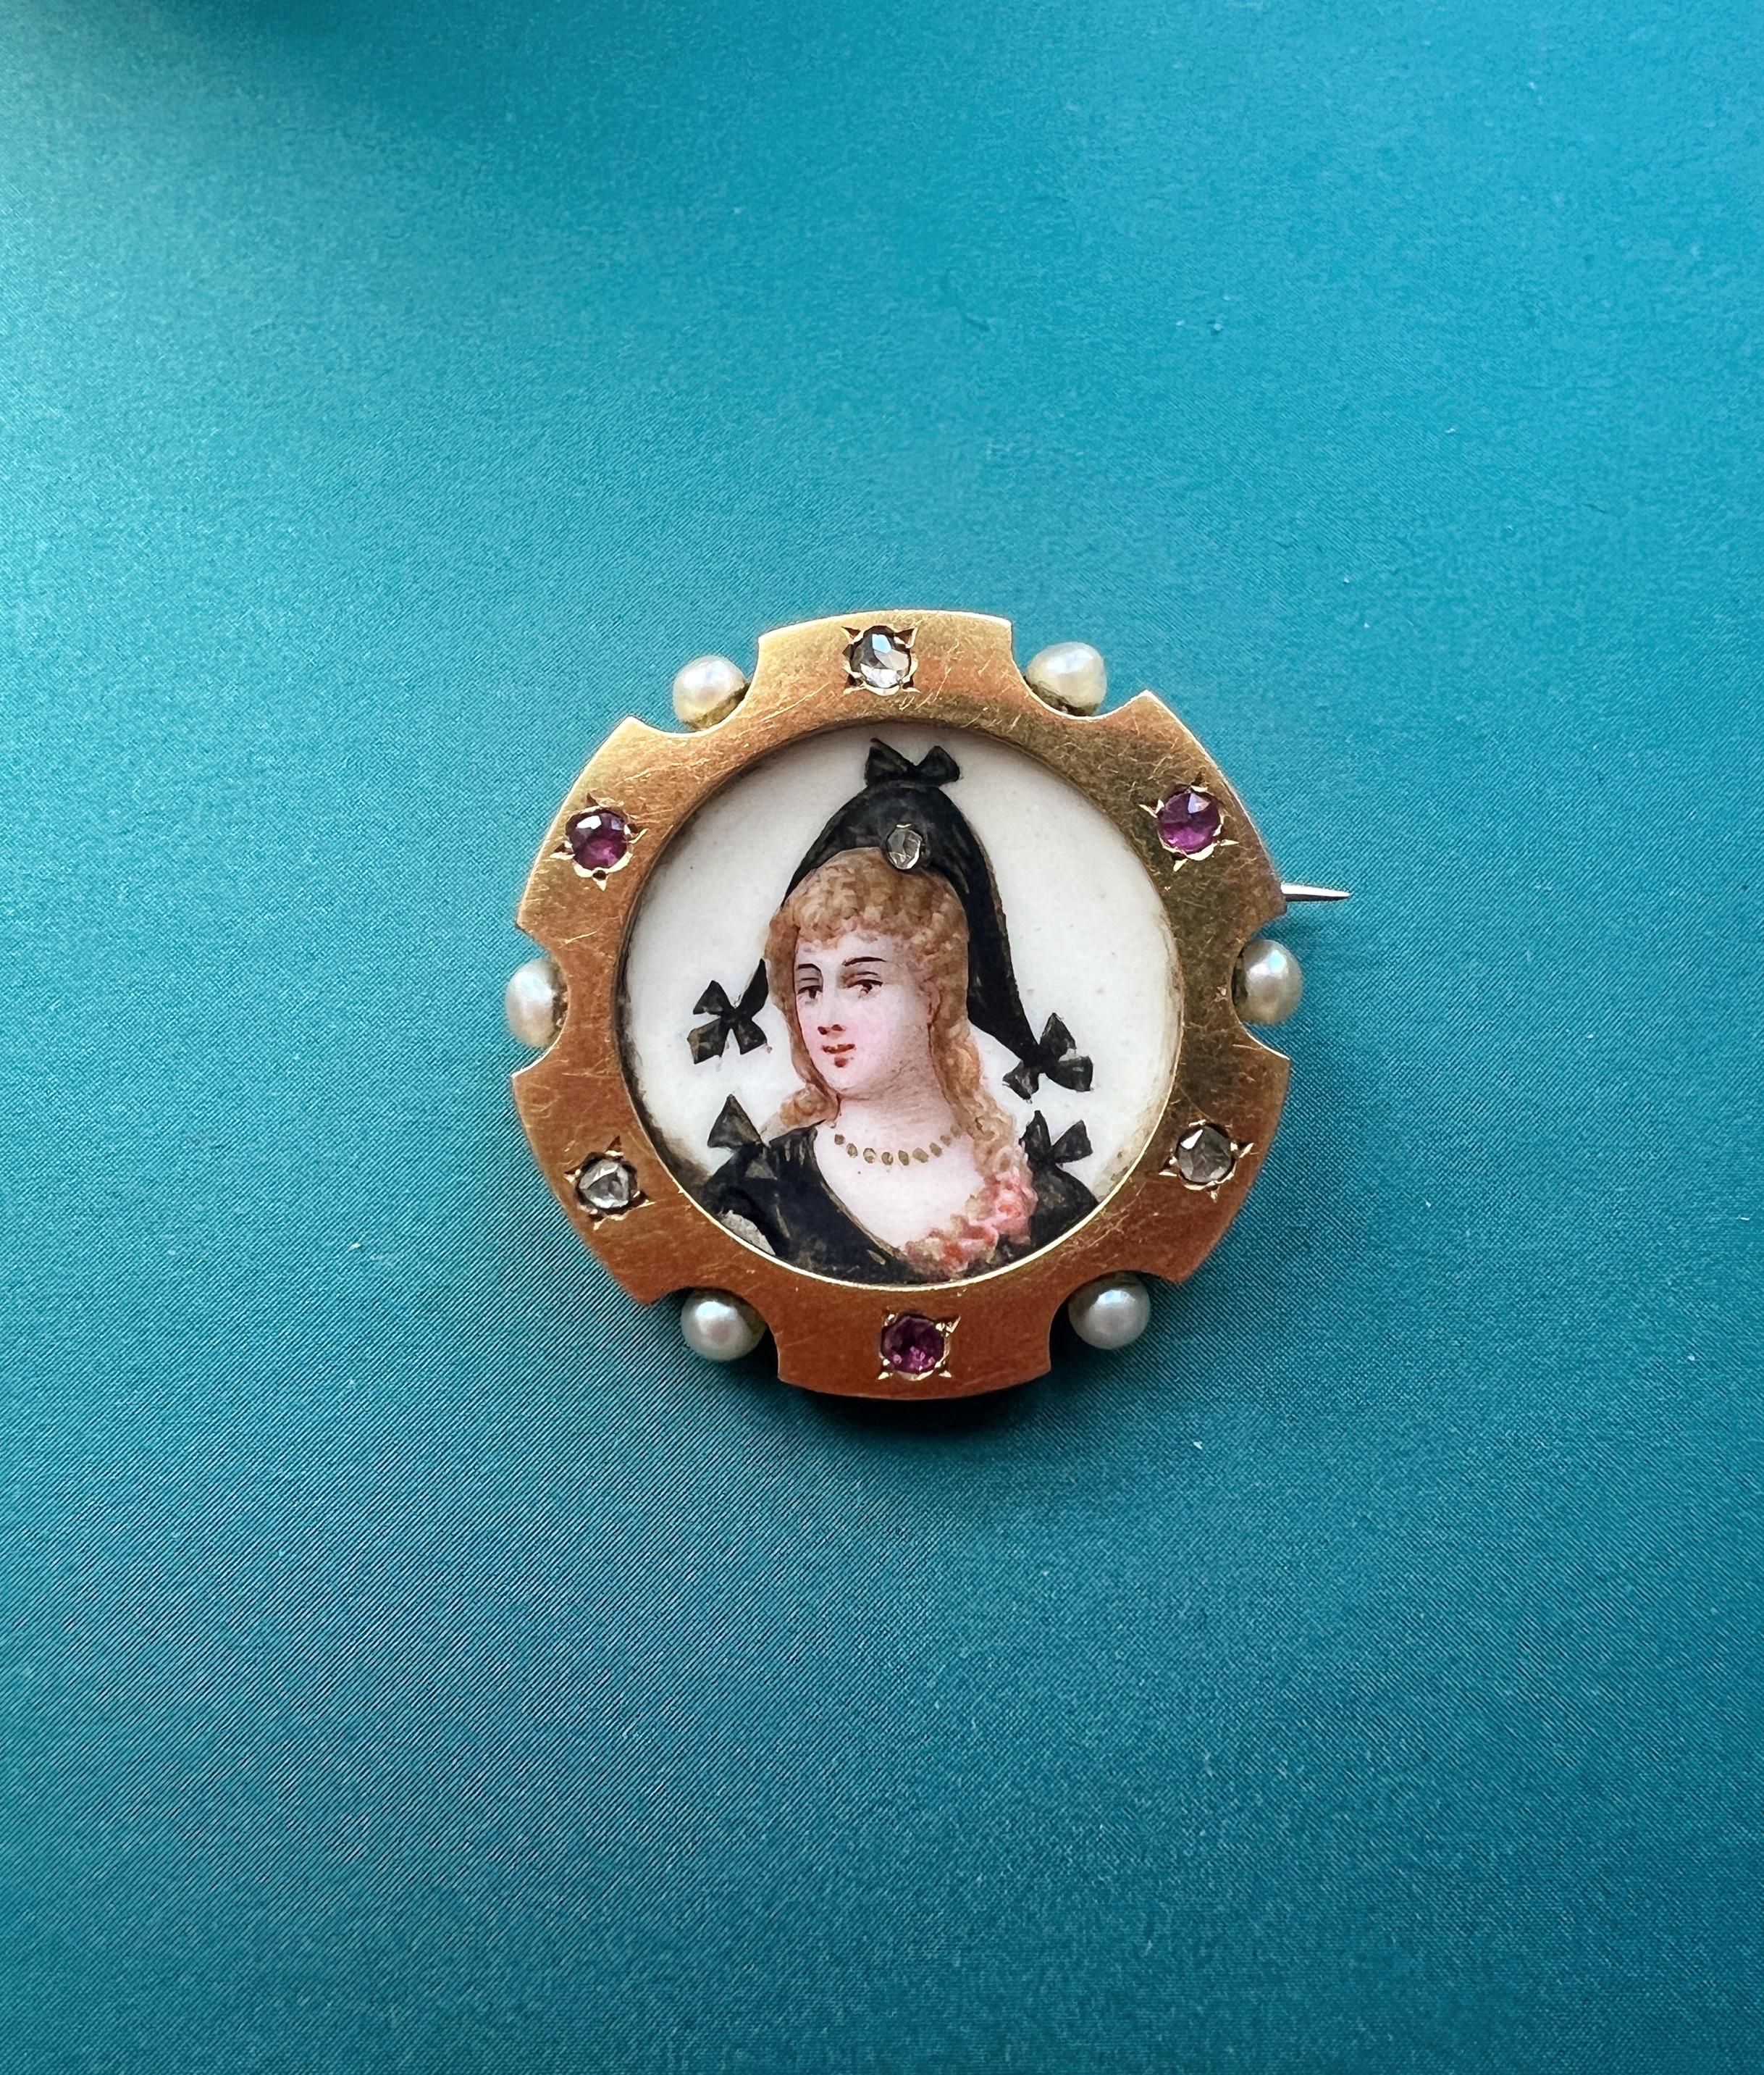 For sale a refined 18K gold bejewelled miniature portrait brooch, featuring a woman wearing an intriguing harlequin heat with a rose cut diamond on it. This type of couture is often seen in the Commedia dell’Arte.

The enemaled painting shows